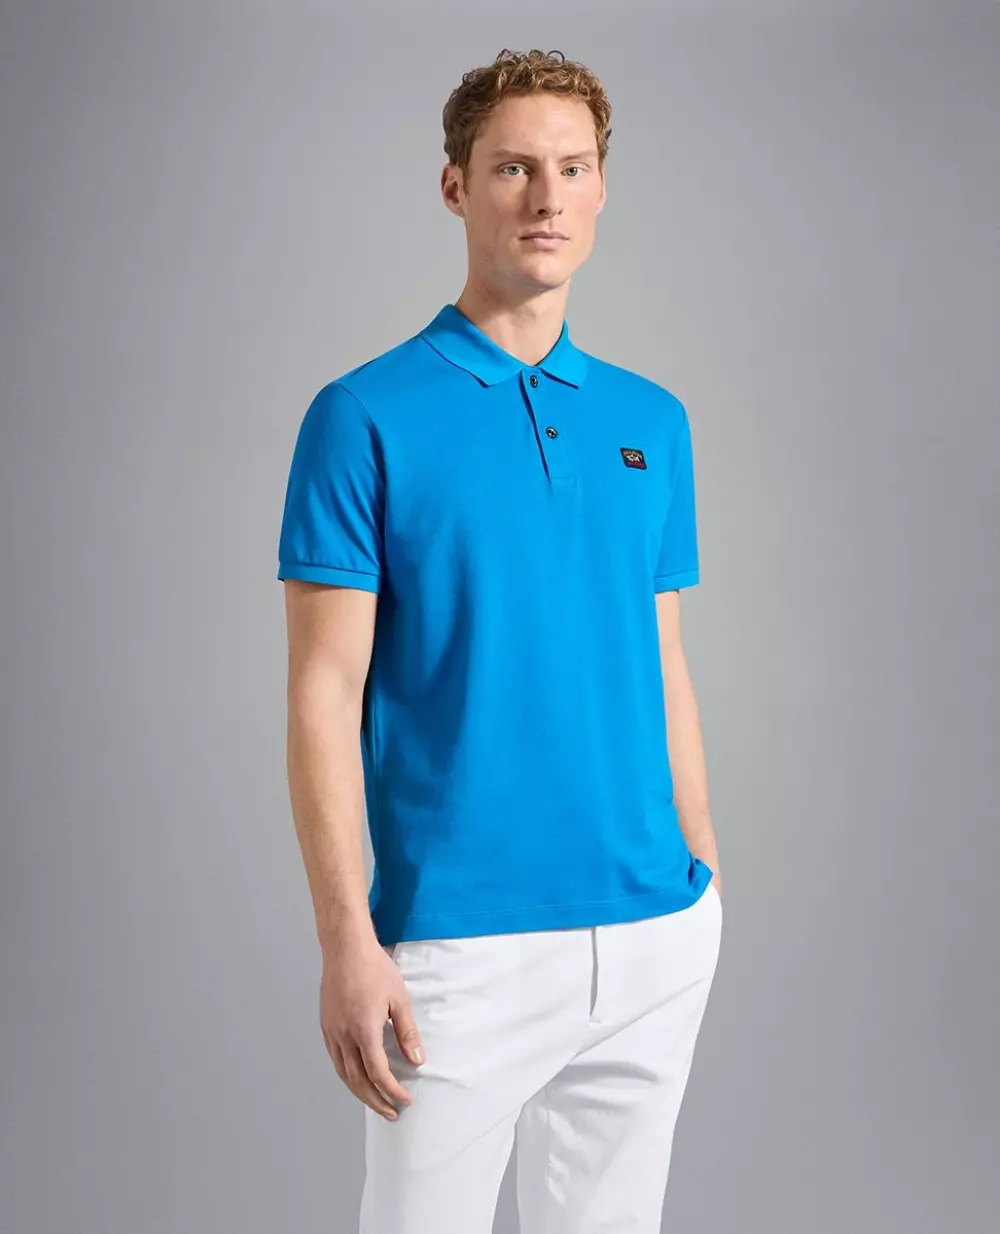 Paul & Shark - MEN'S KNITTED POLOSHIRT C.W. COTTON, POLO & RUGBY, KORT ARM, PAUL & SHARK, C0P1000SF _49, Piqué cotton polo with iconic badge, HERRE, COBALT BLUE